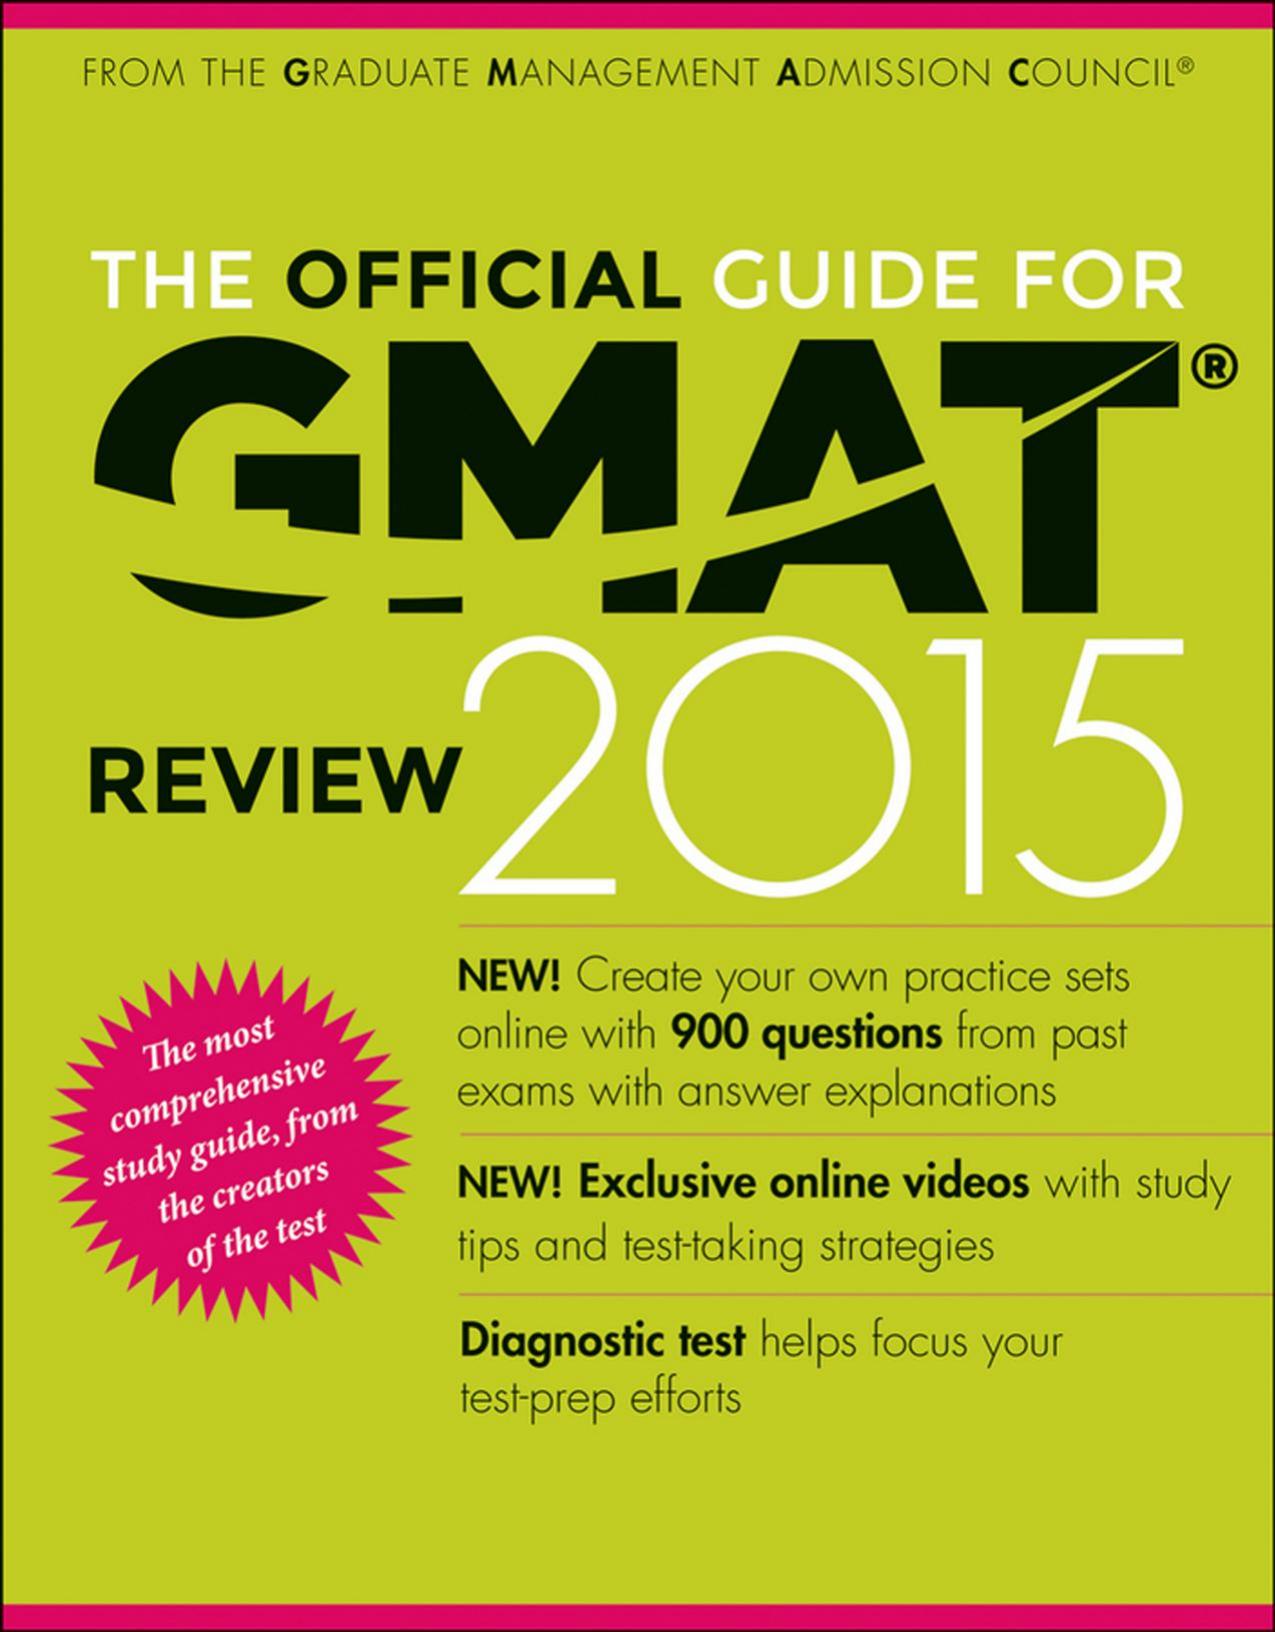 The Official Guide for GMAT Review 2015 with Online Question Bank and Exclusive Video by Graduate Management Admission Council (GMAC)